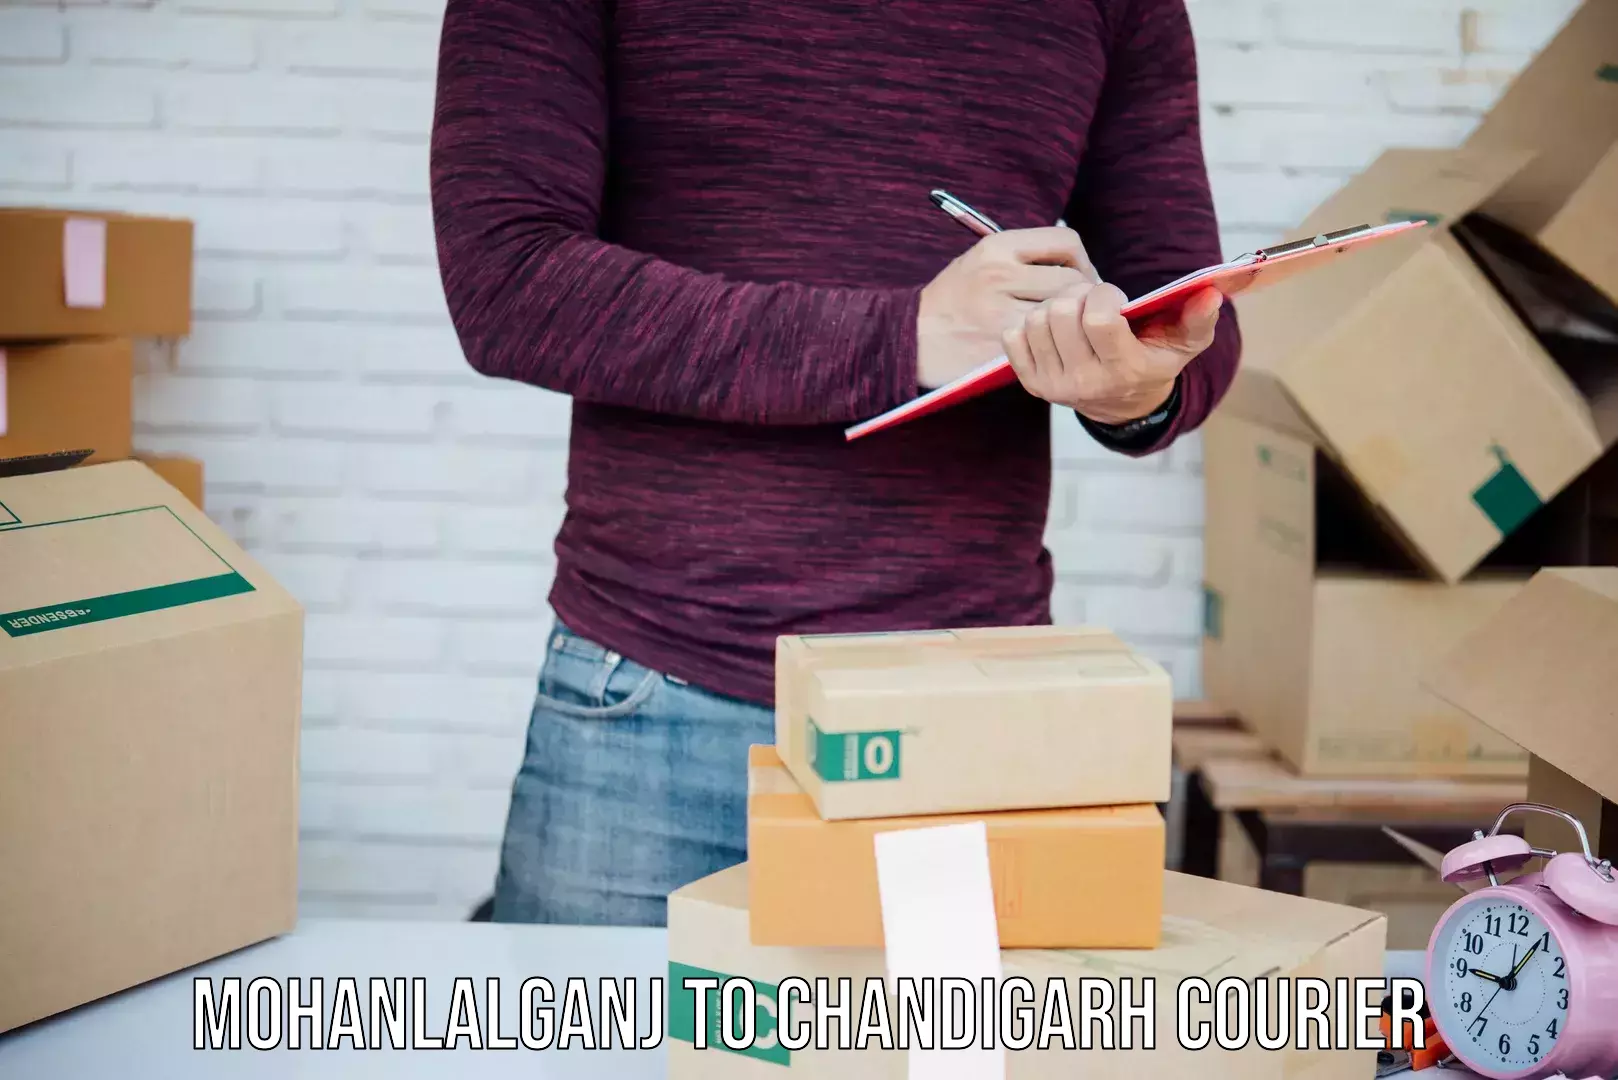 State-of-the-art courier technology Mohanlalganj to Chandigarh